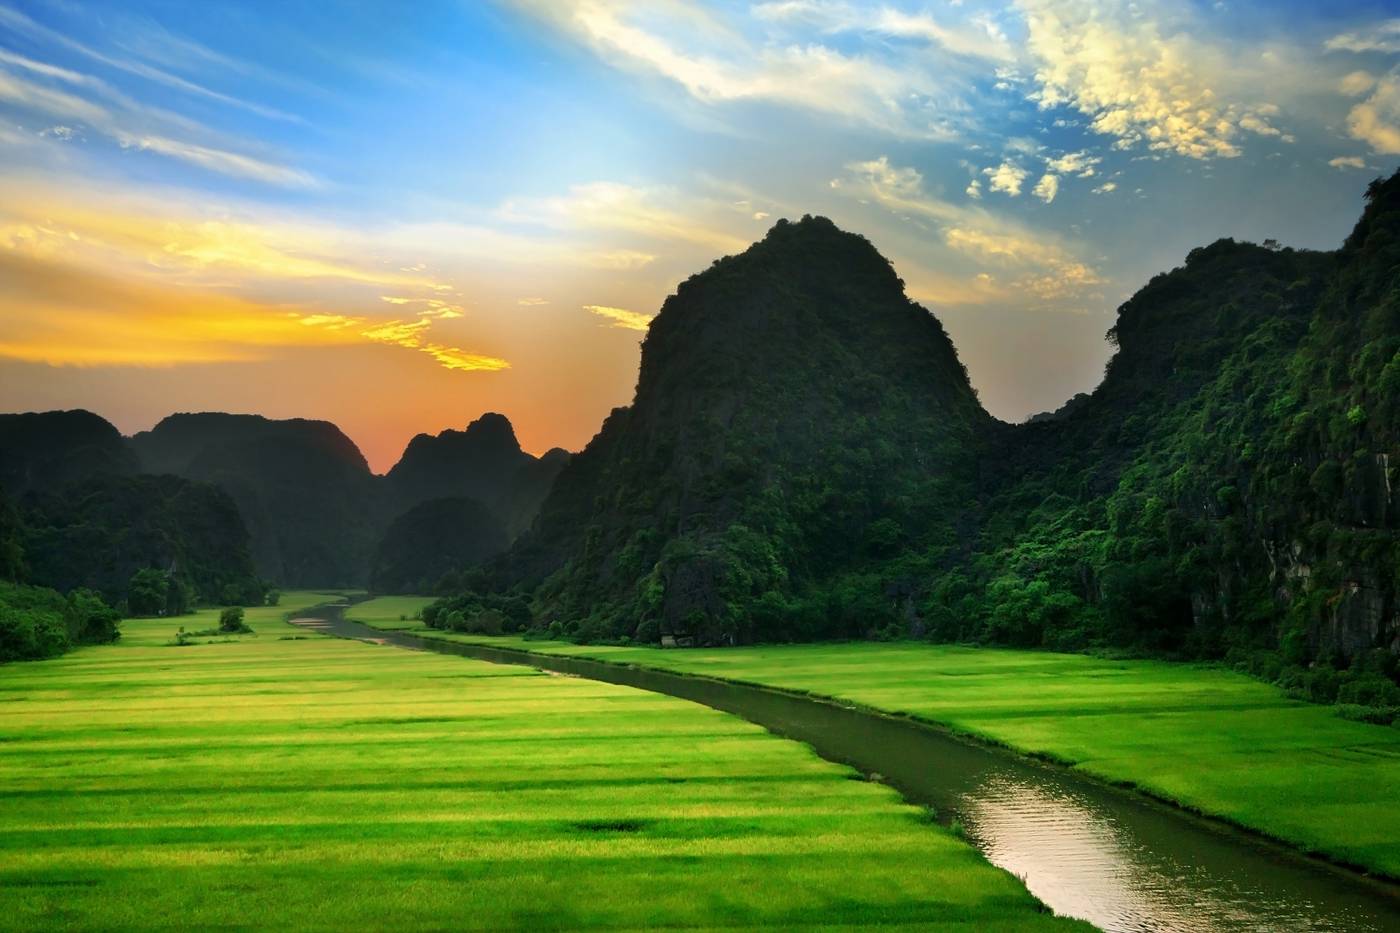 DISCOVER THE HIGHLIGHTS OF NINH BINH